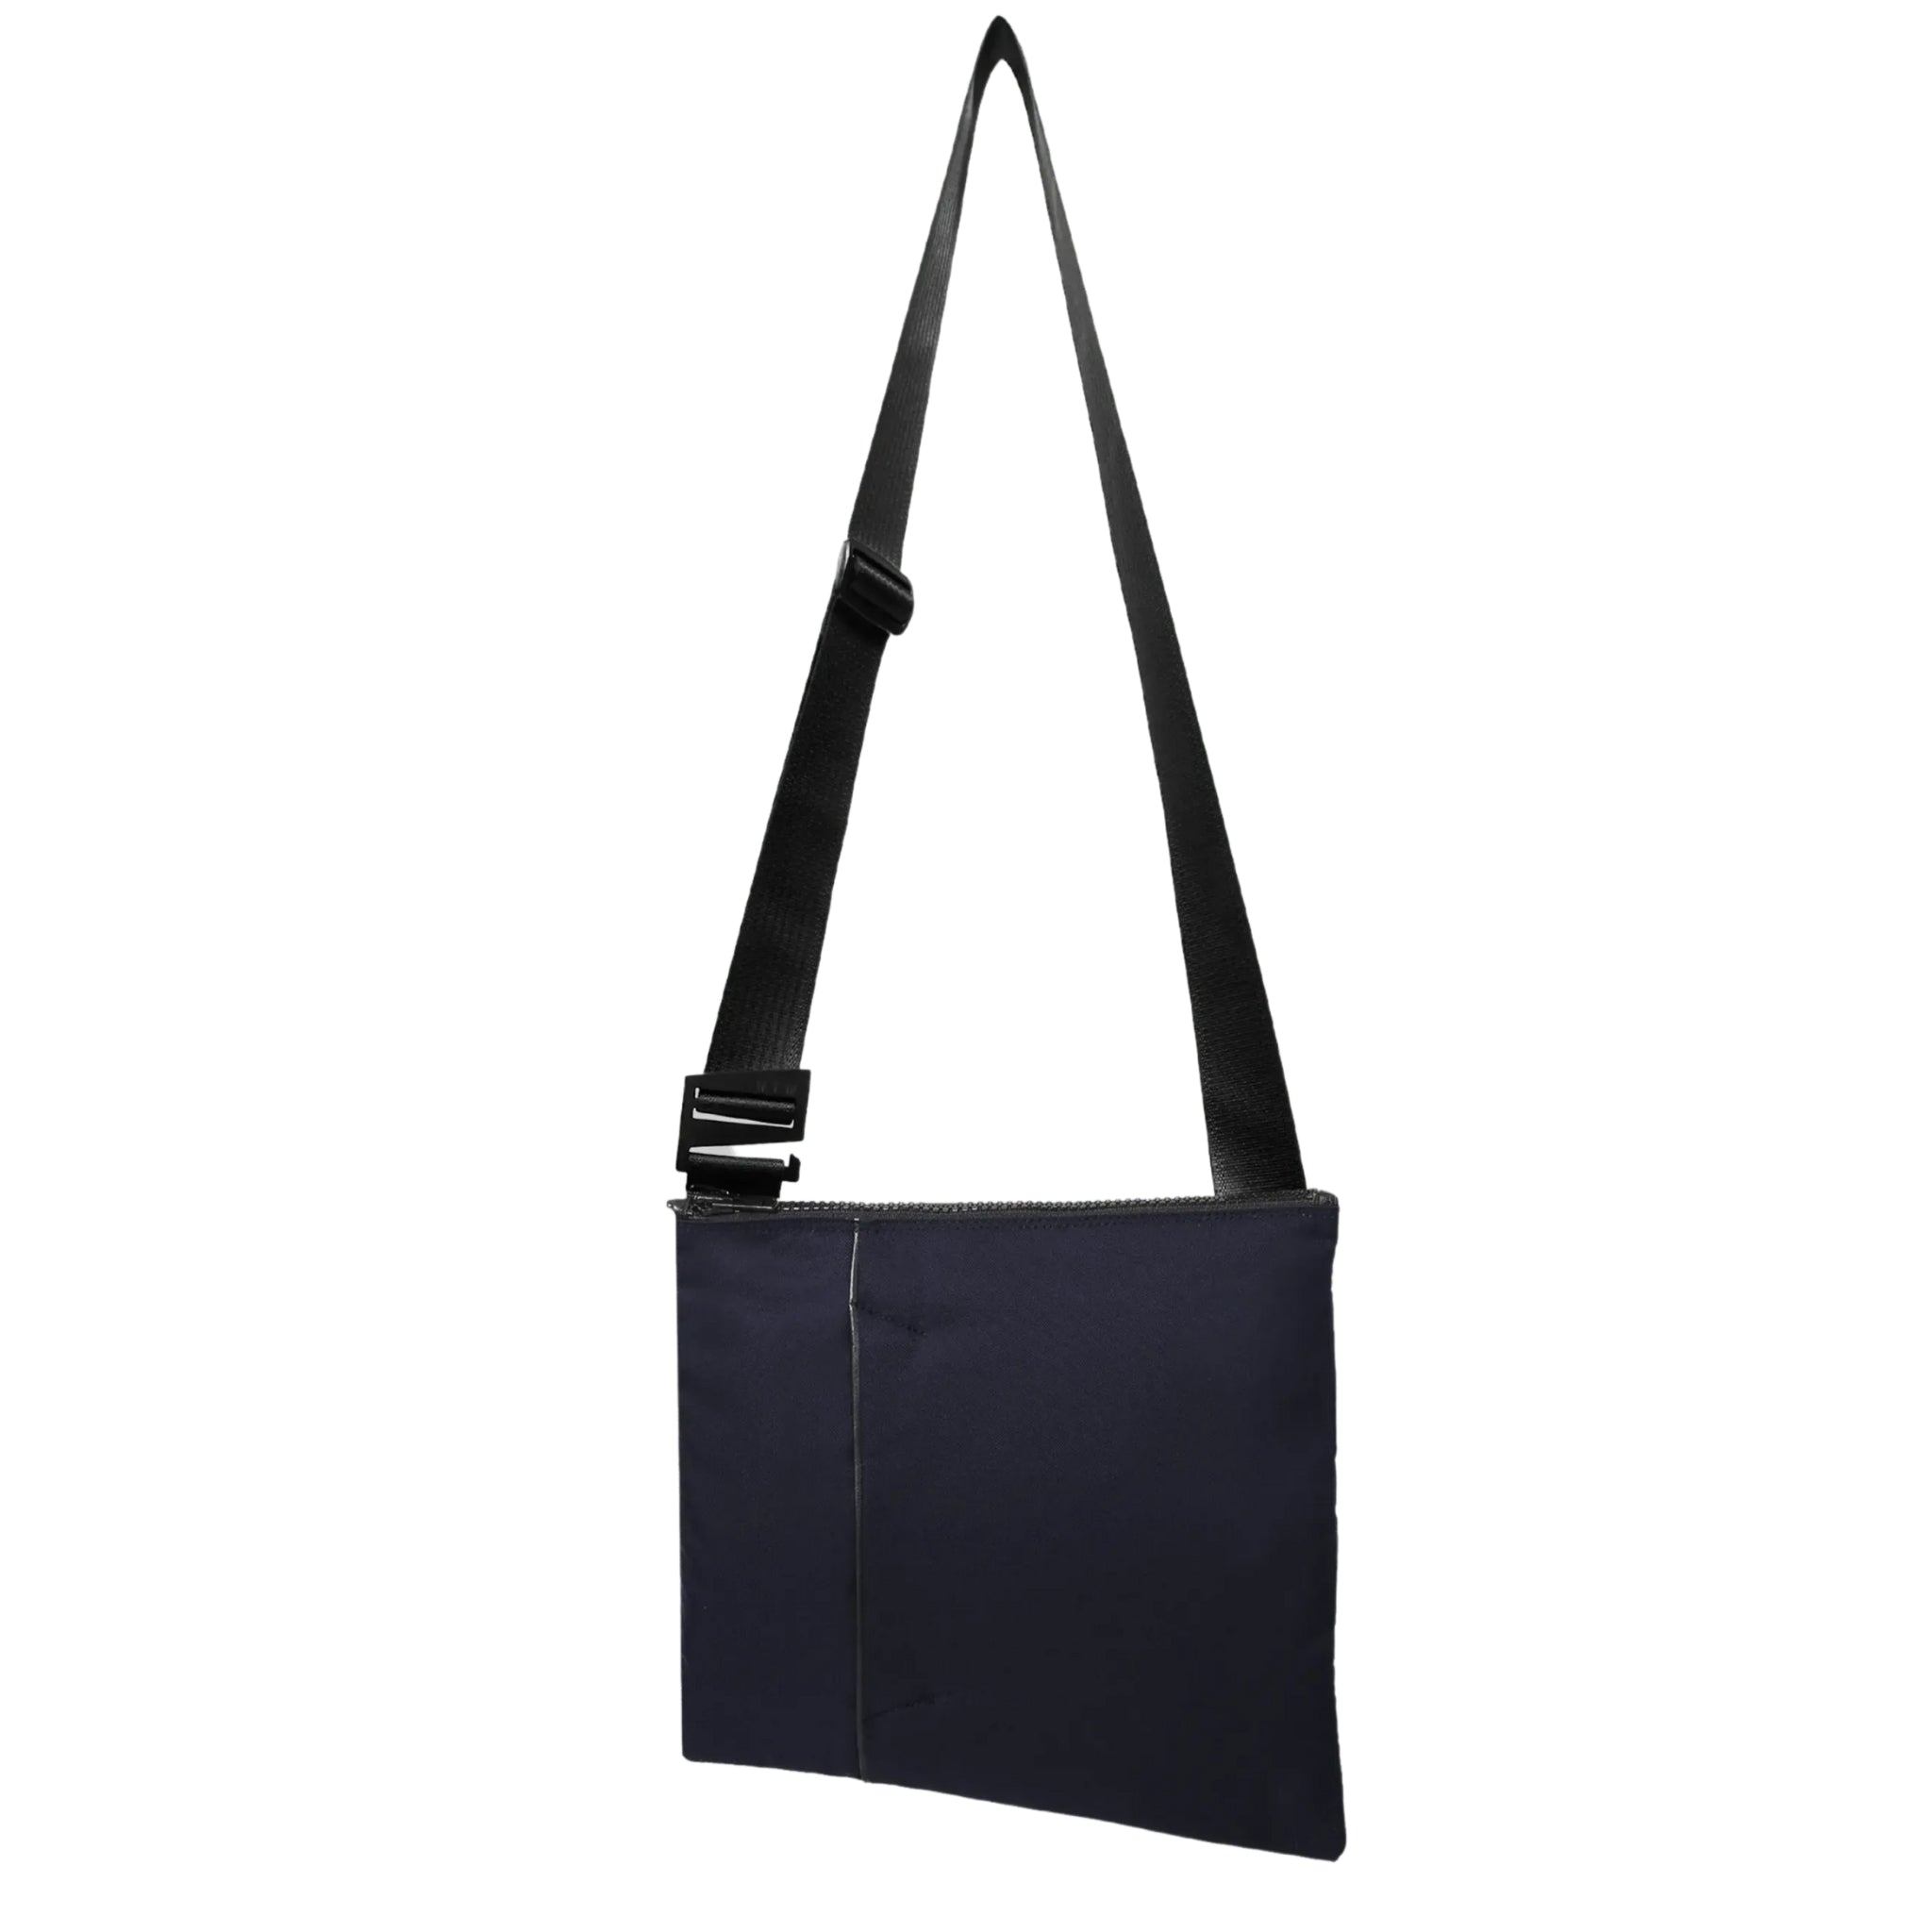 The ANDO satchel in navy upcycled fishnets (econyl). Product shown at the front/center of a white background